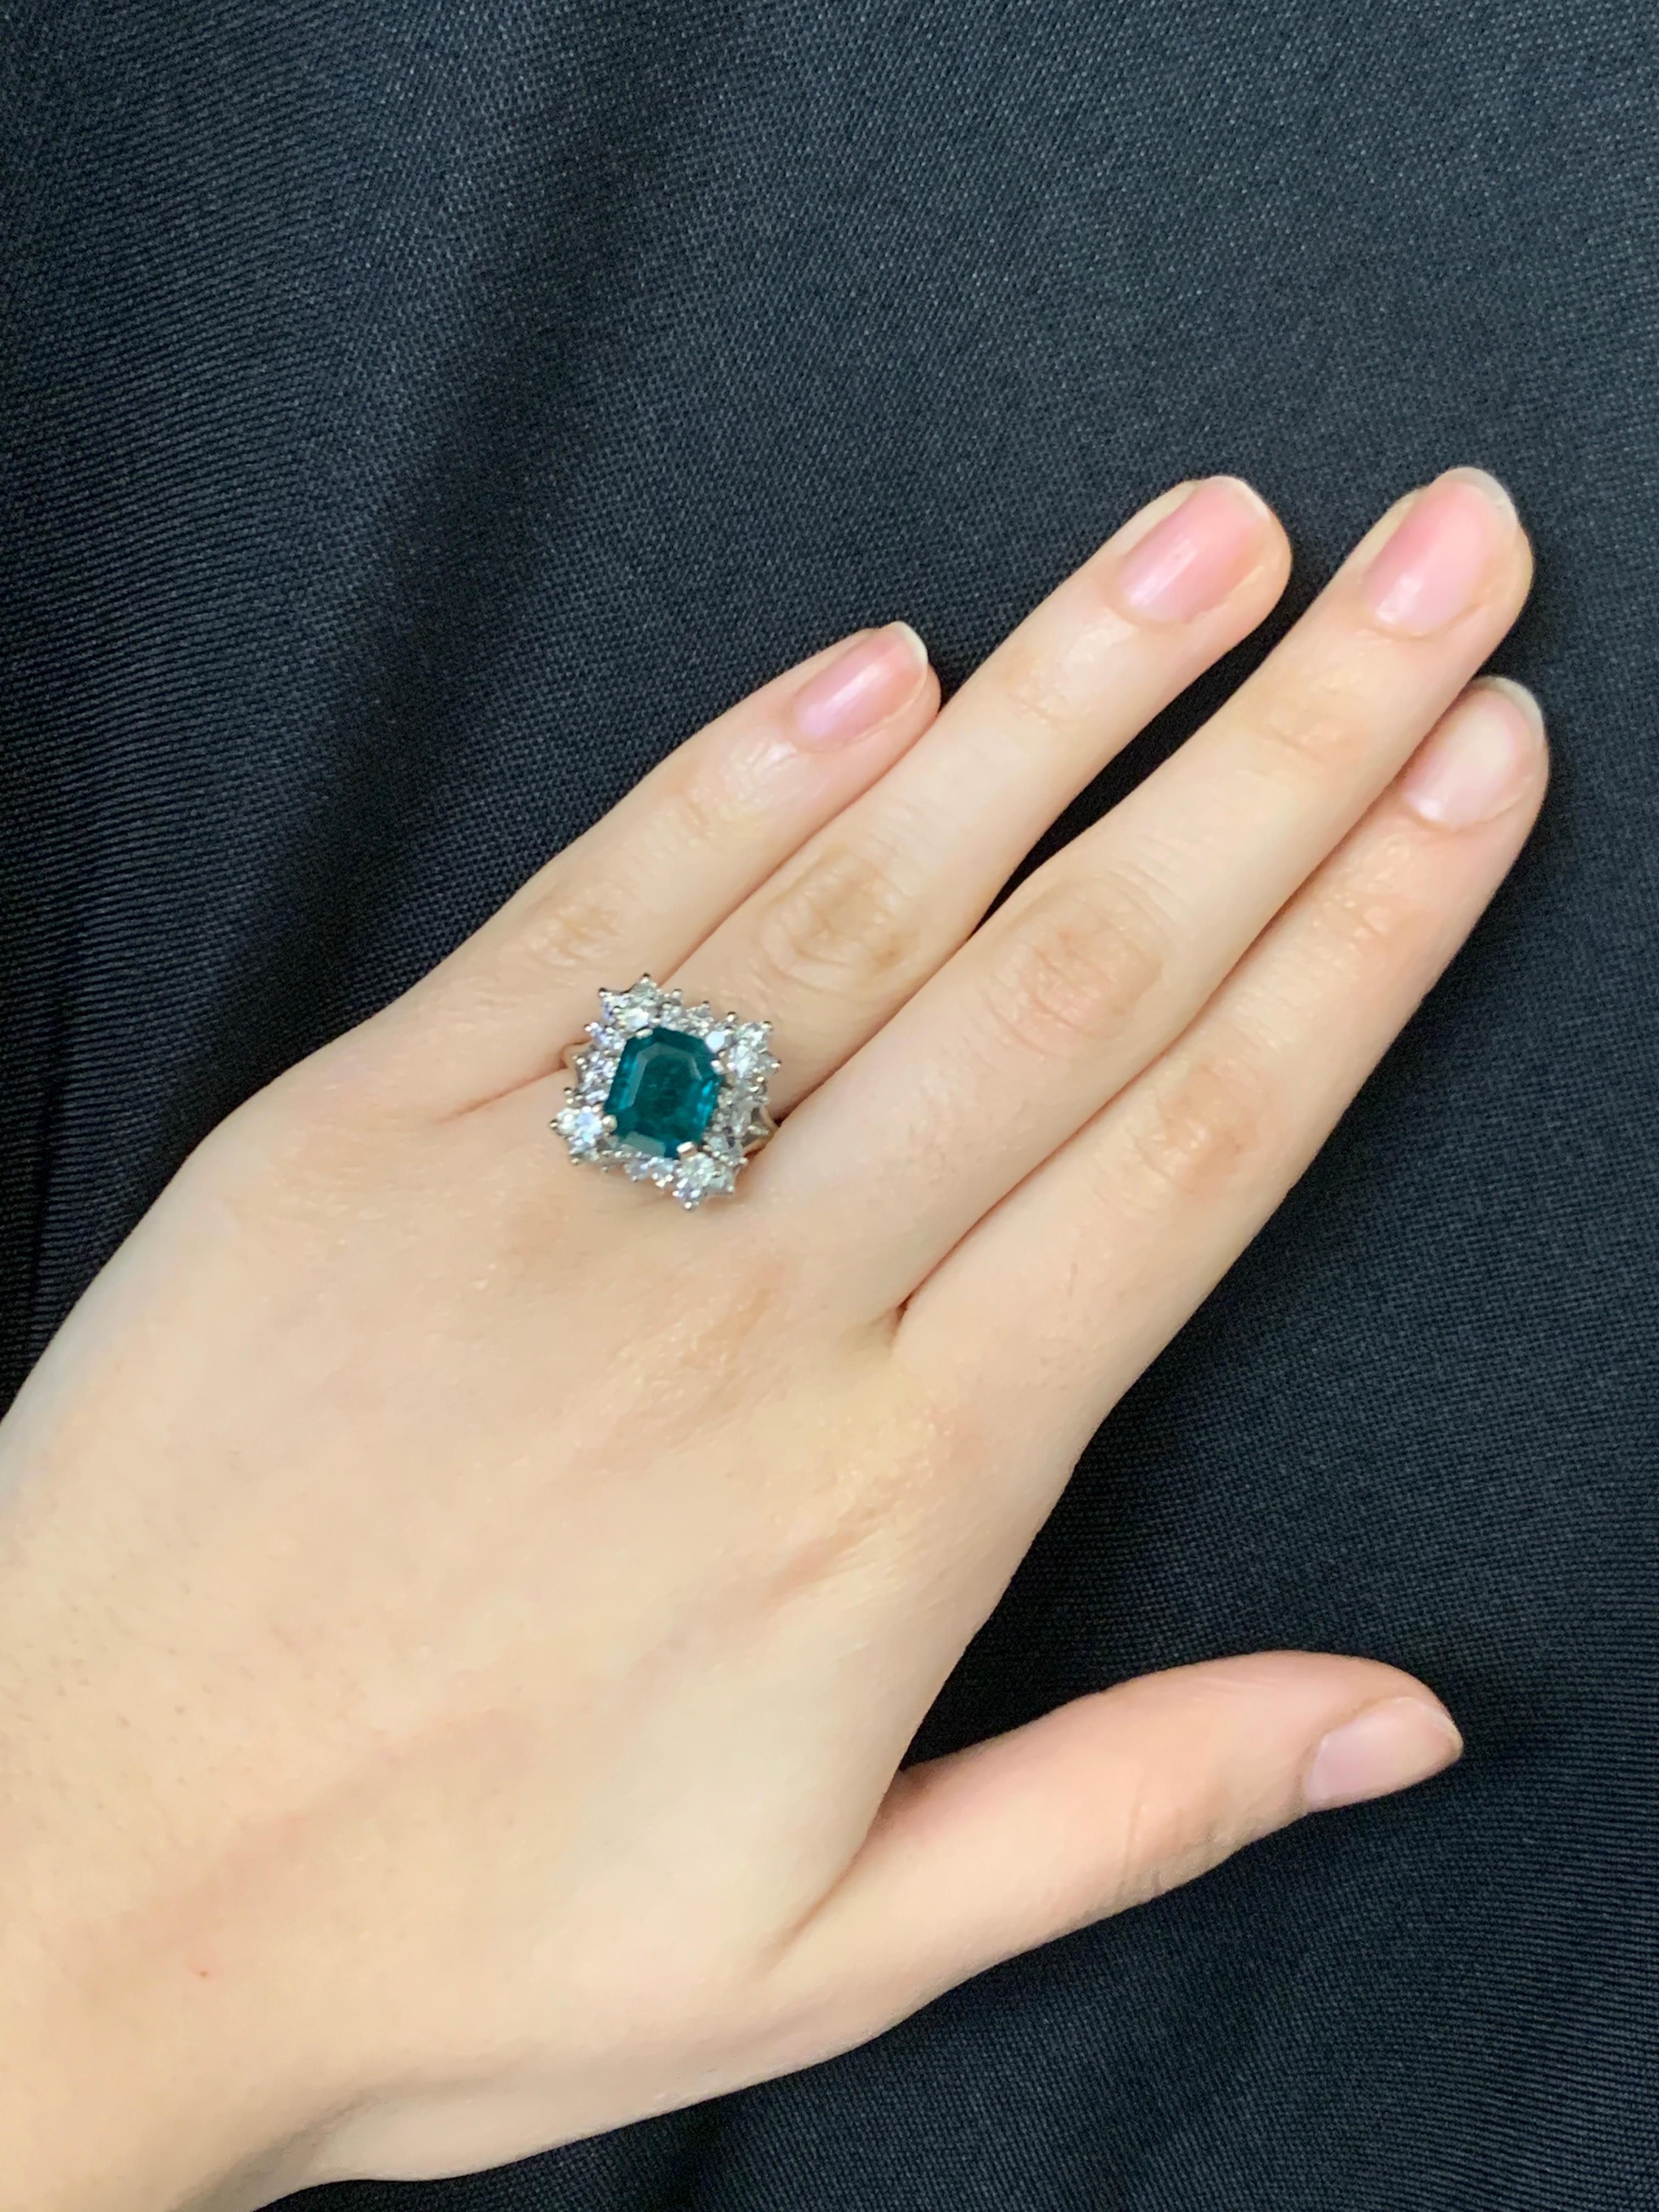 Emerald and Diamond Ring 

A white gold ring set with a central emerald framed by round-cut diamonds

Emerald Approximate Weight: 3.05 carats

Total Approximate Diamond Weight: 2.16 carats

Ring Size: 6.5

Resizable free of charge

Metal Type: 14